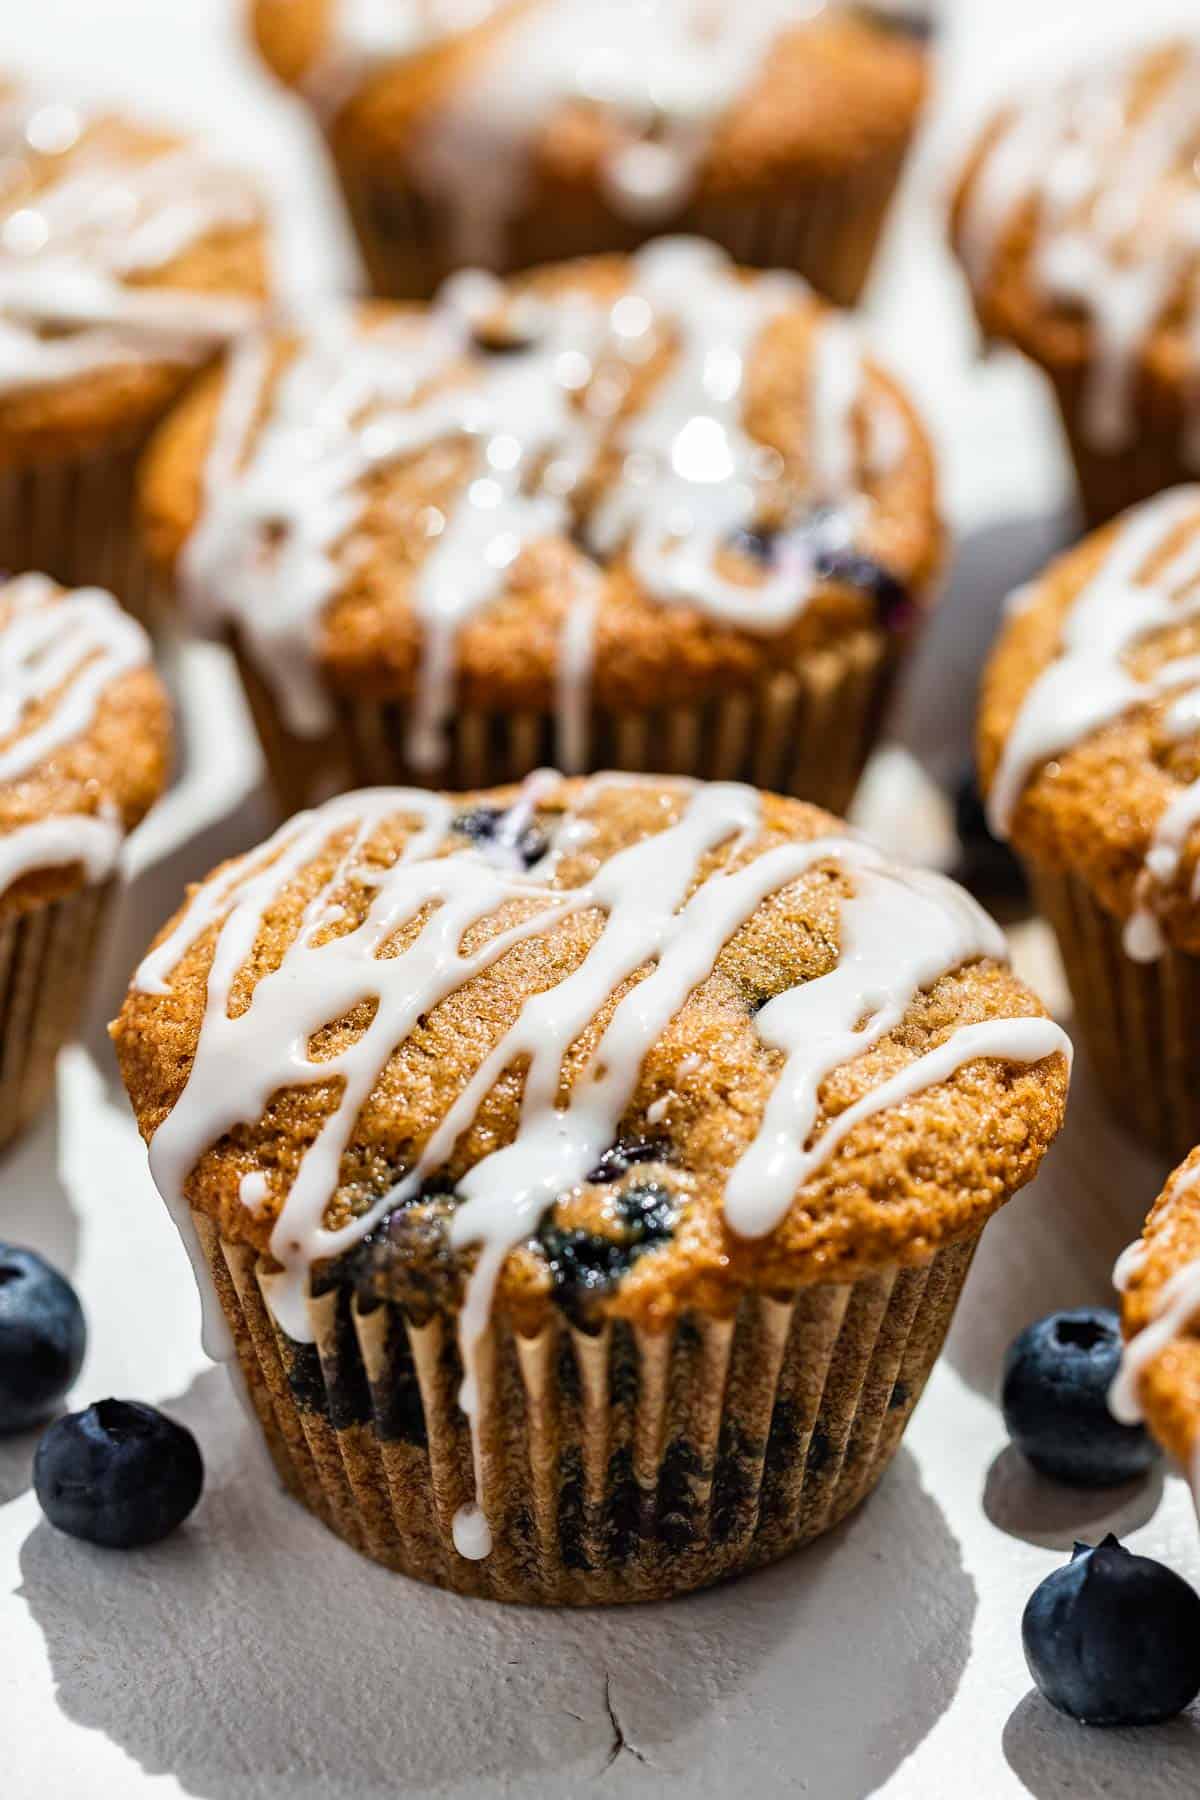 Side view of glazed paleo blueberry muffins on a white background with blueberries around them.